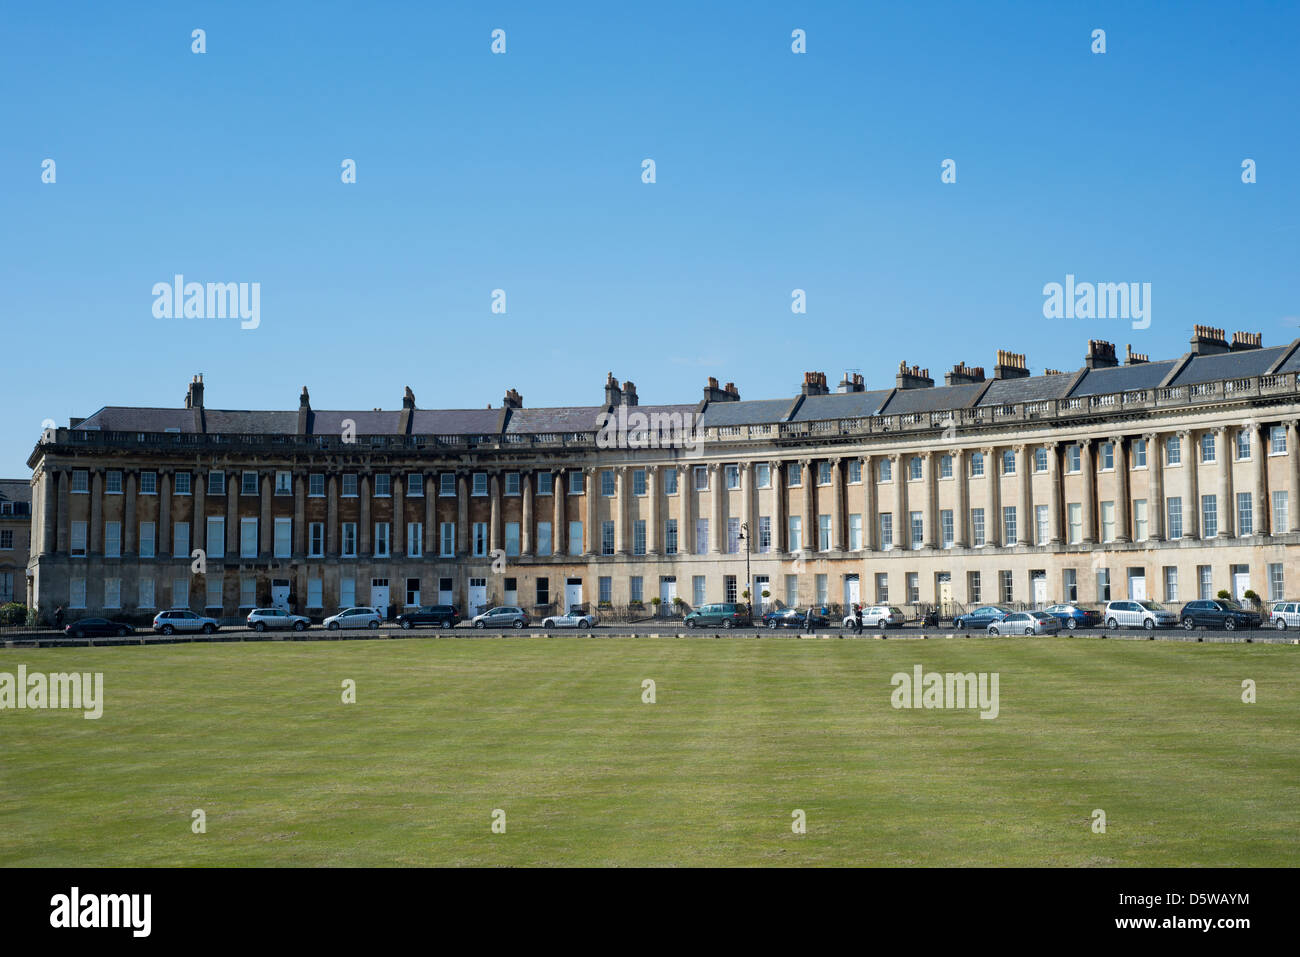 The Royal Crescent in Bath, Somerset, England. Stock Photo